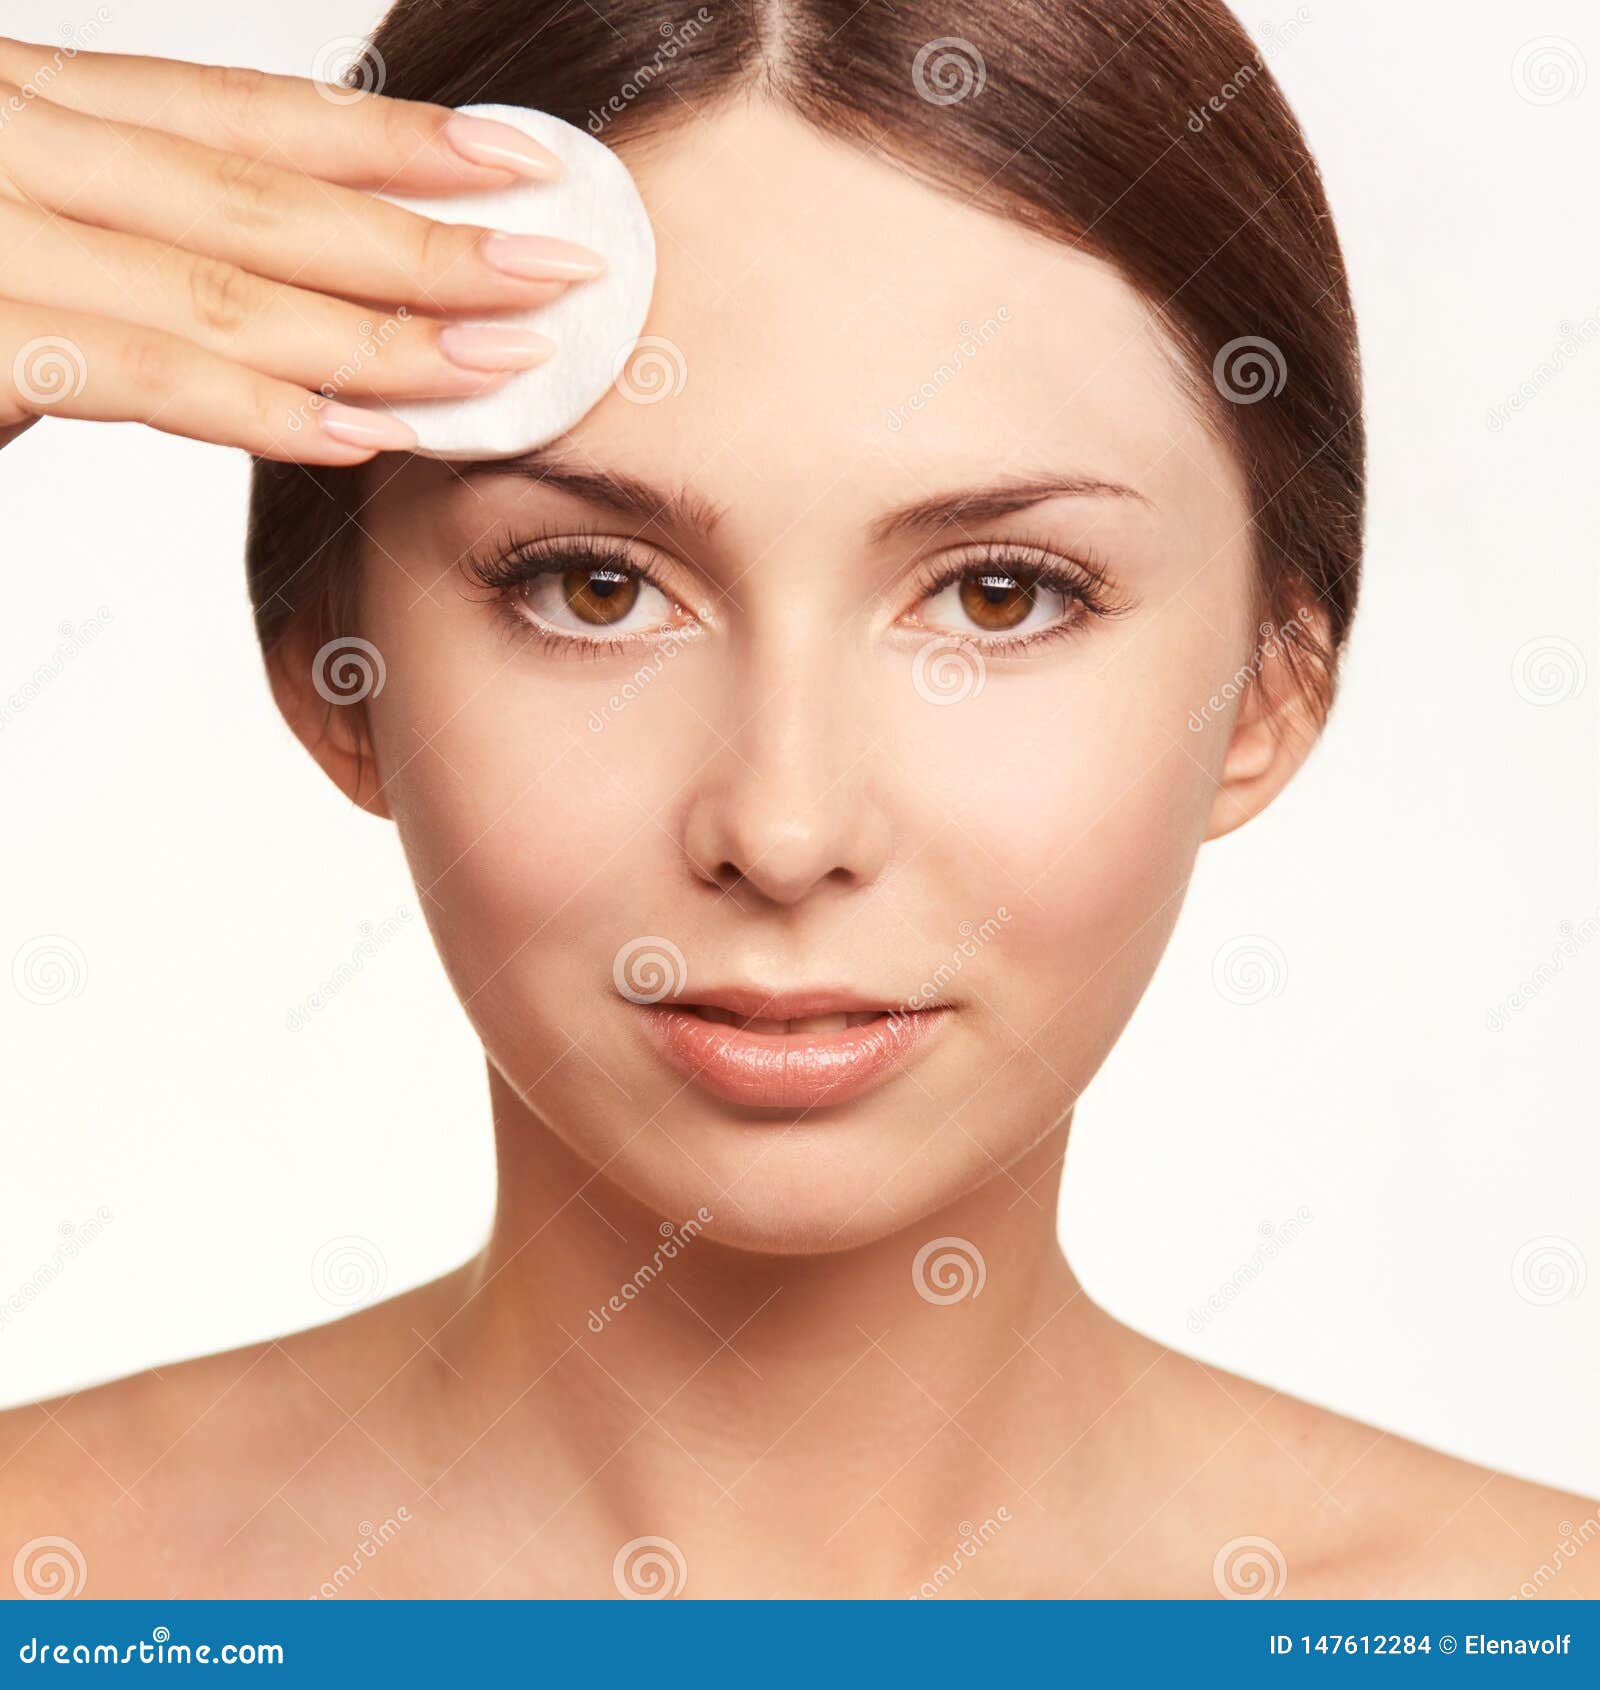 home face care. girl remove makeup. woman hand with pad. skin clean with cotton